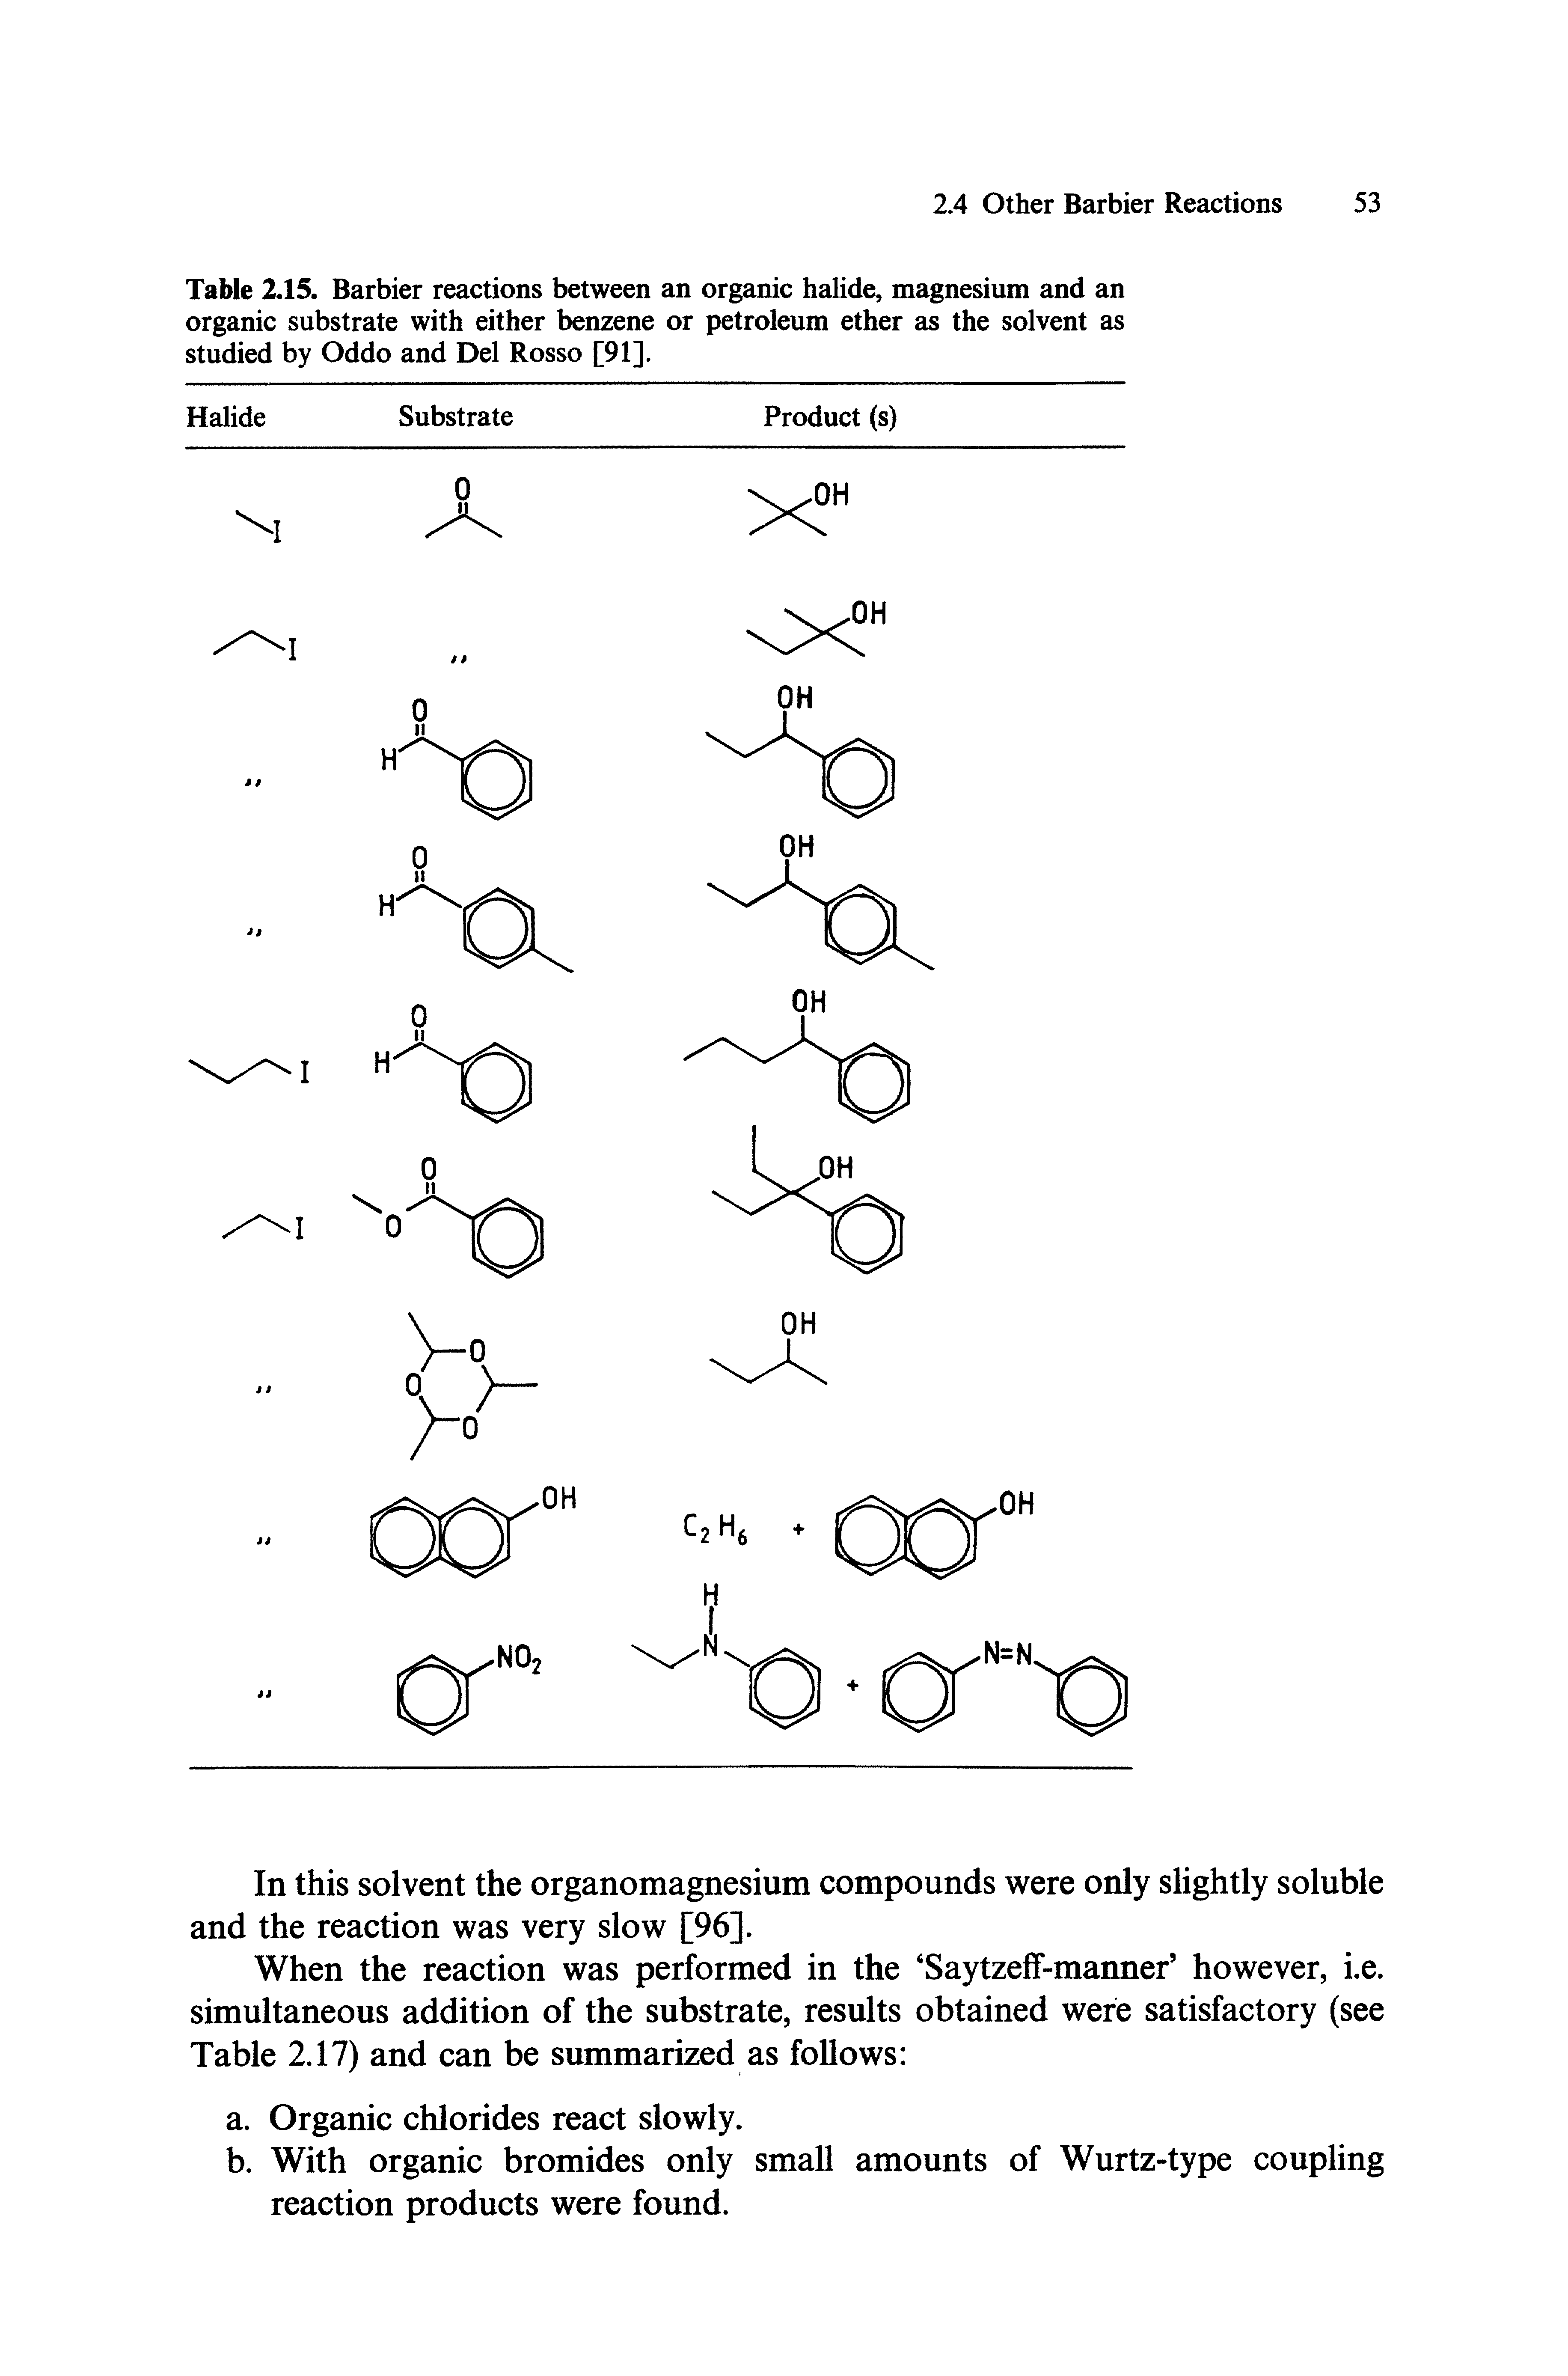 Table 2.15. Barbier reactions between an organic halide, magnesium and an organic substrate with either benzene or petroleum ether as the solvent as studied by Oddo and Del Rosso [91].